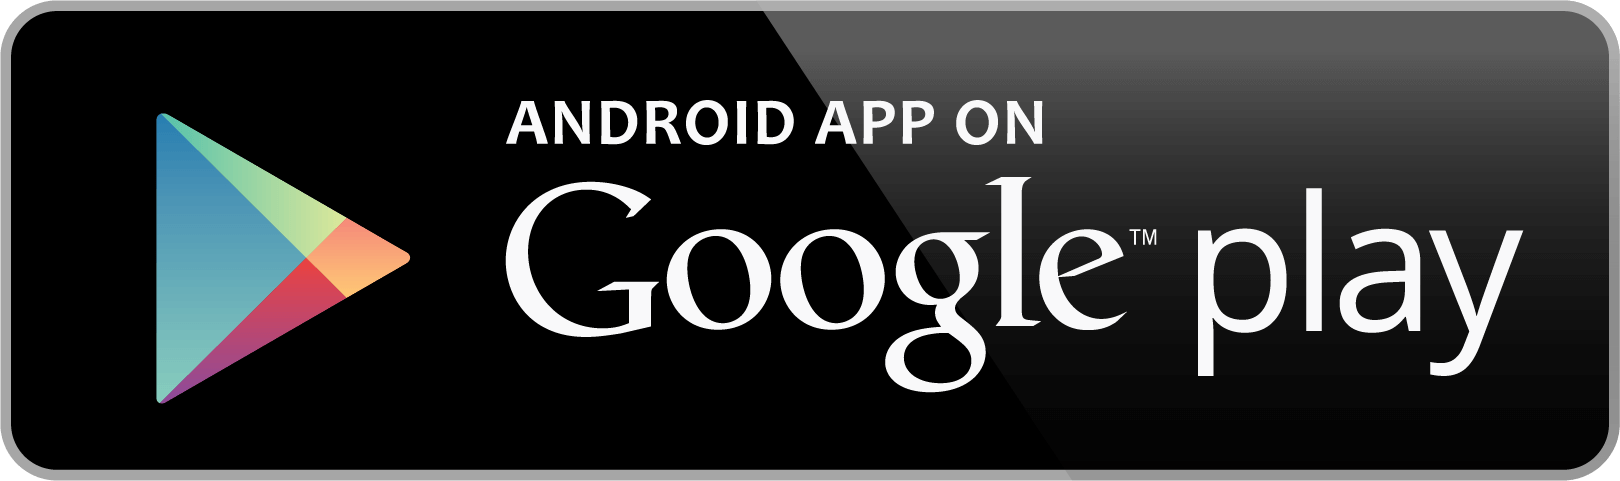 Android Store Logo